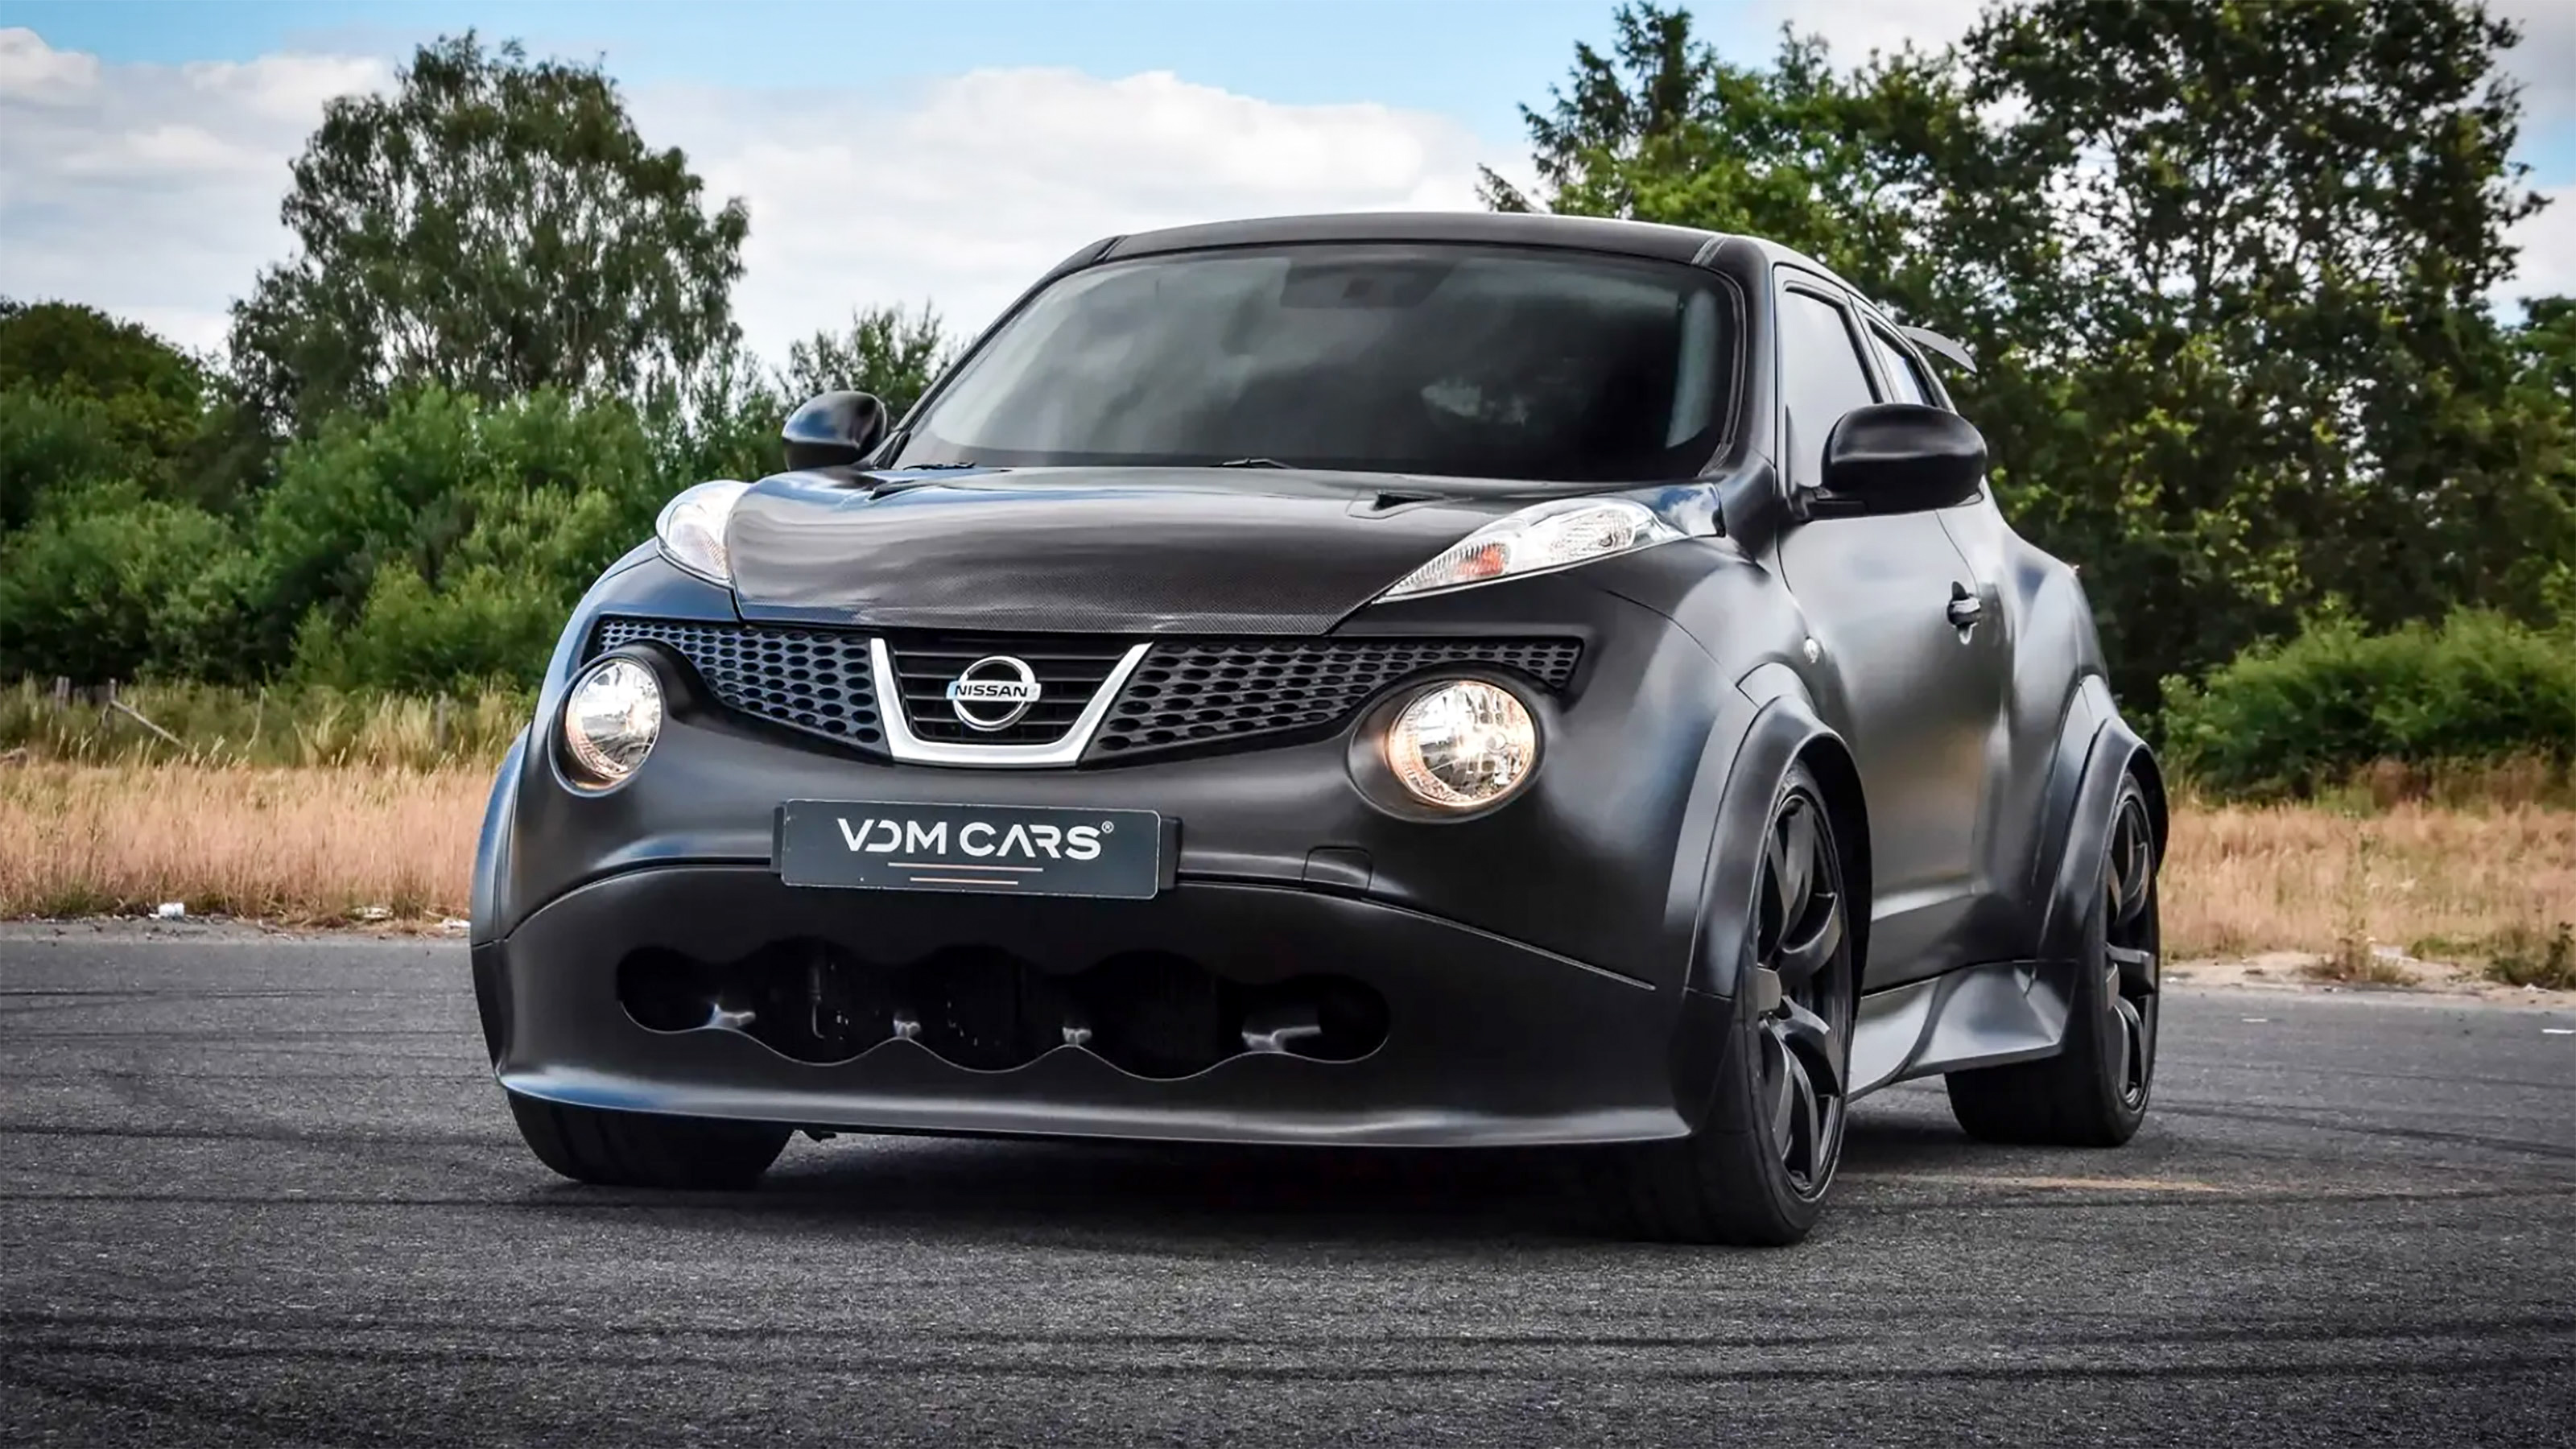 This Nissan JukeR can be yours for 719,579 evo